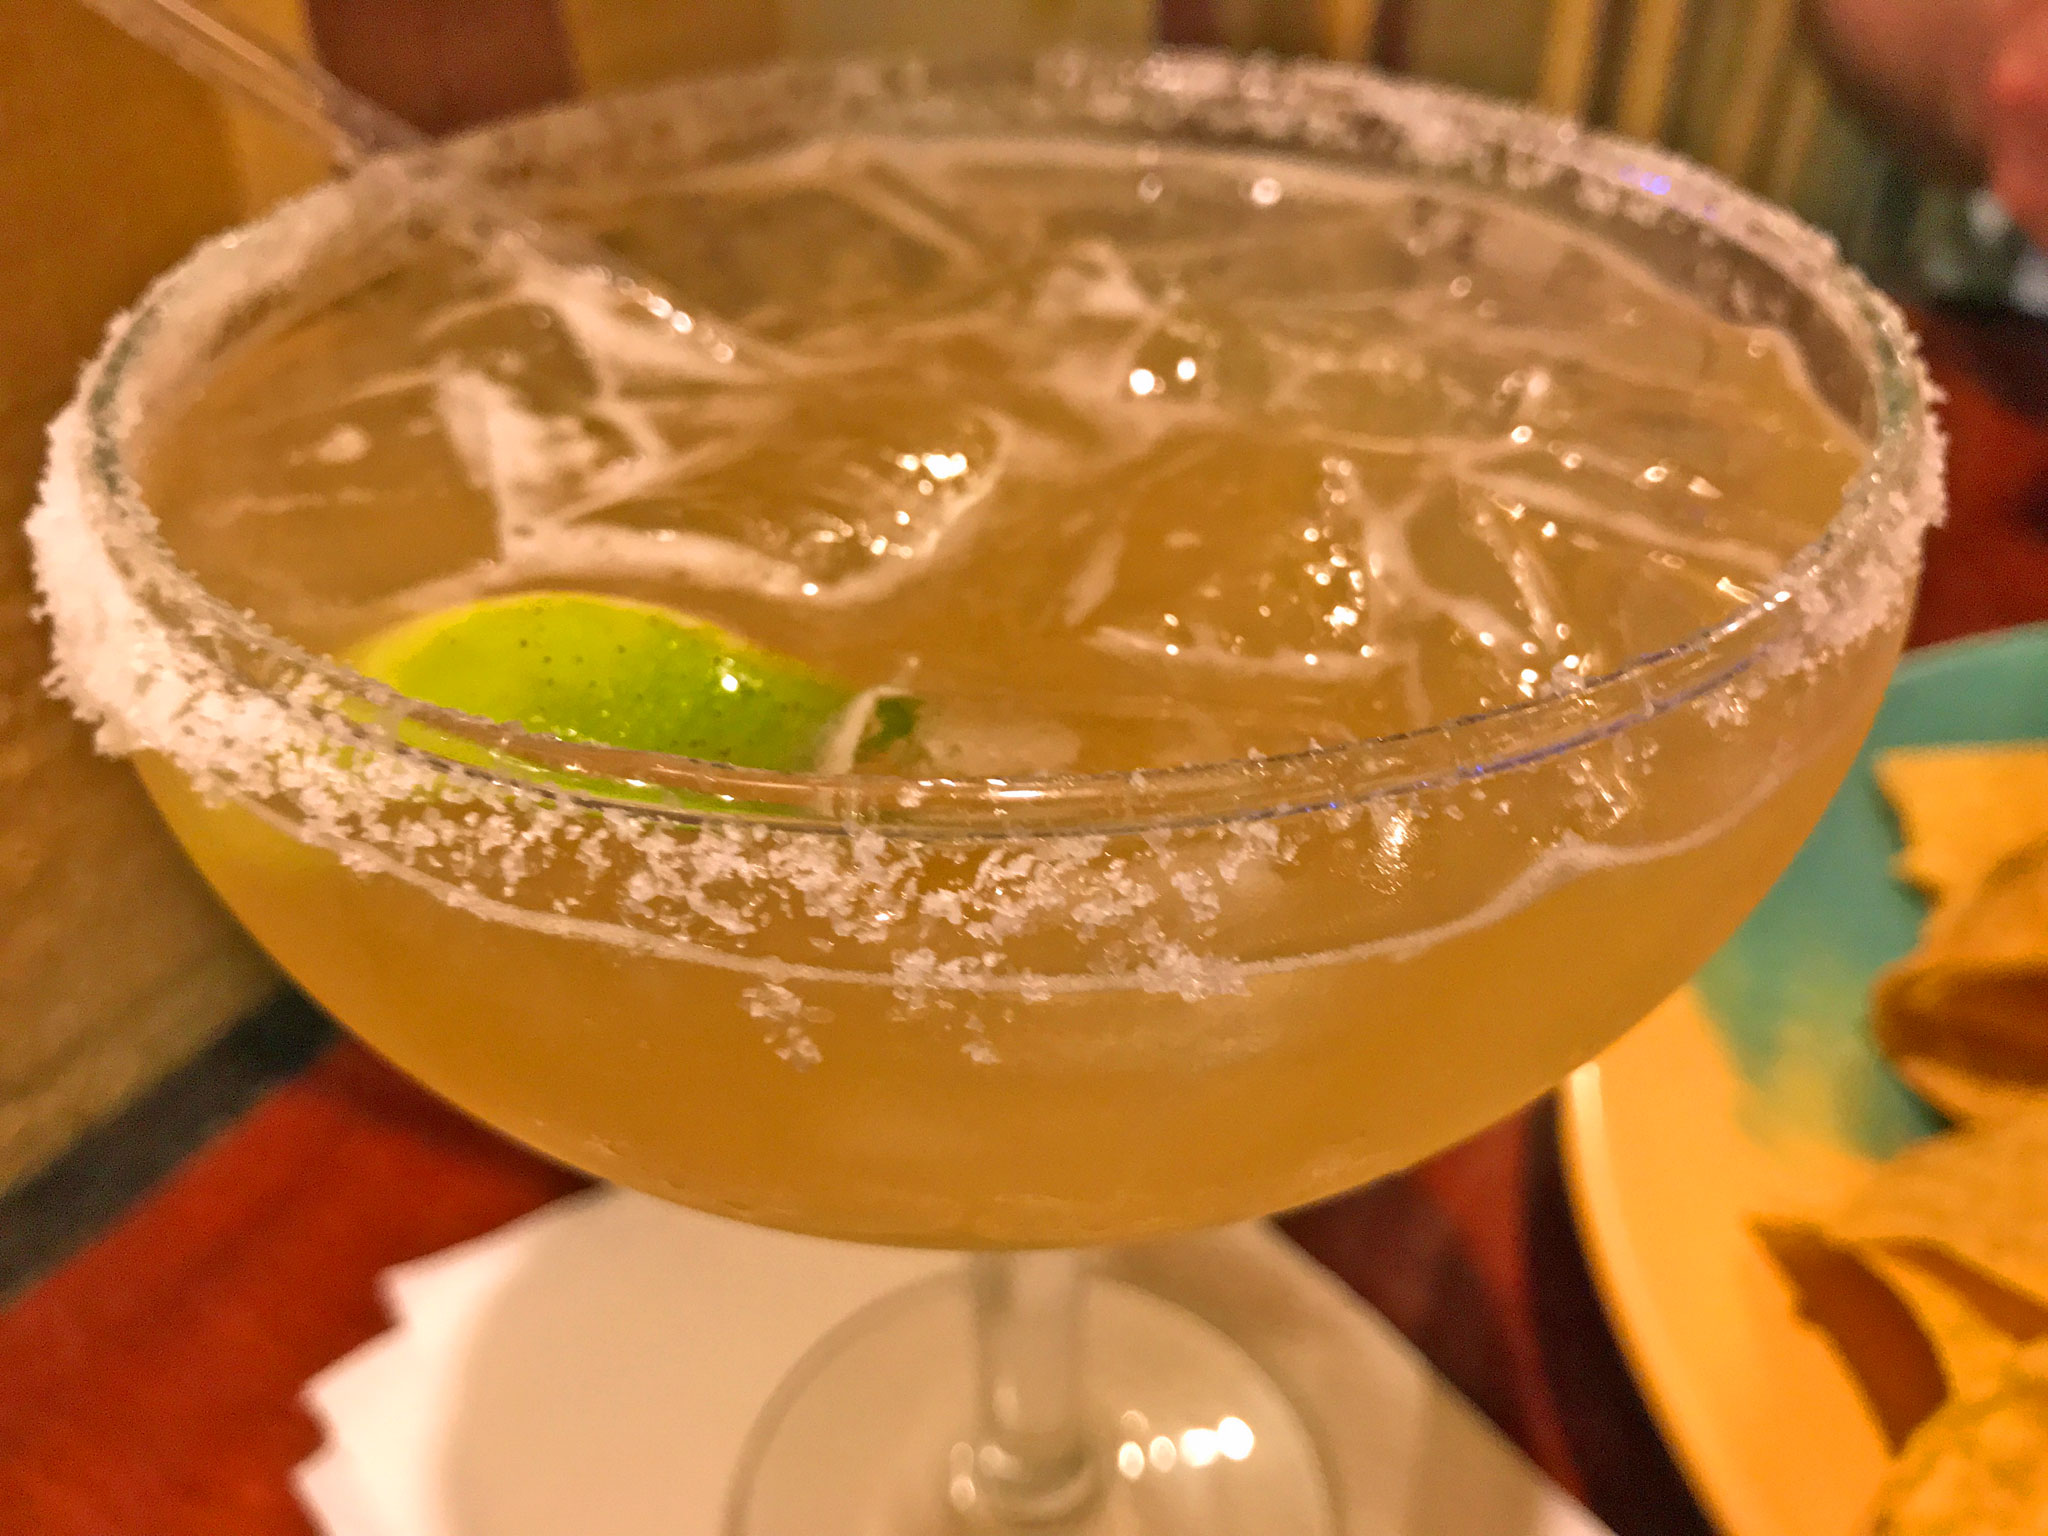 Millionaire Margarita Made with Casmigos Anejo Tequila